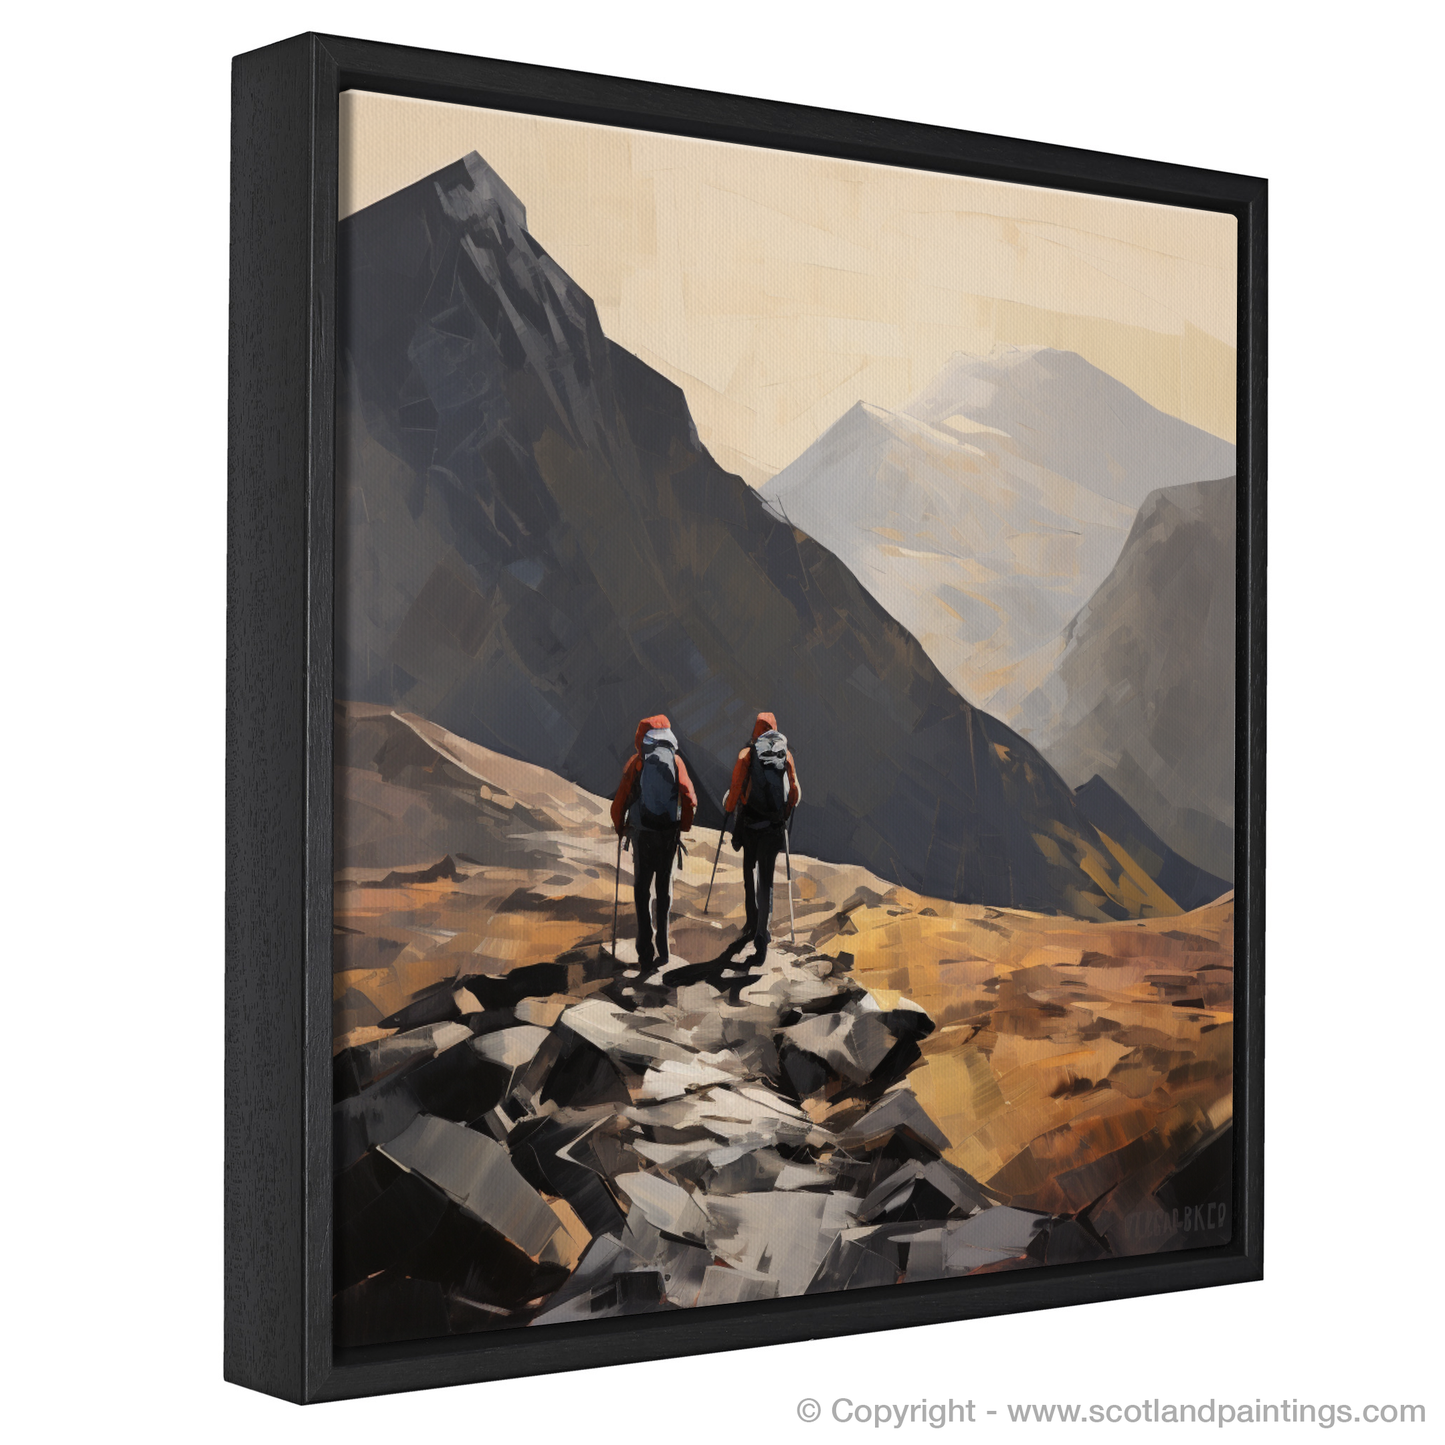 Painting and Art Print of Hikers in Glencoe entitled "Hikers Amidst the Majesty of Glencoe".